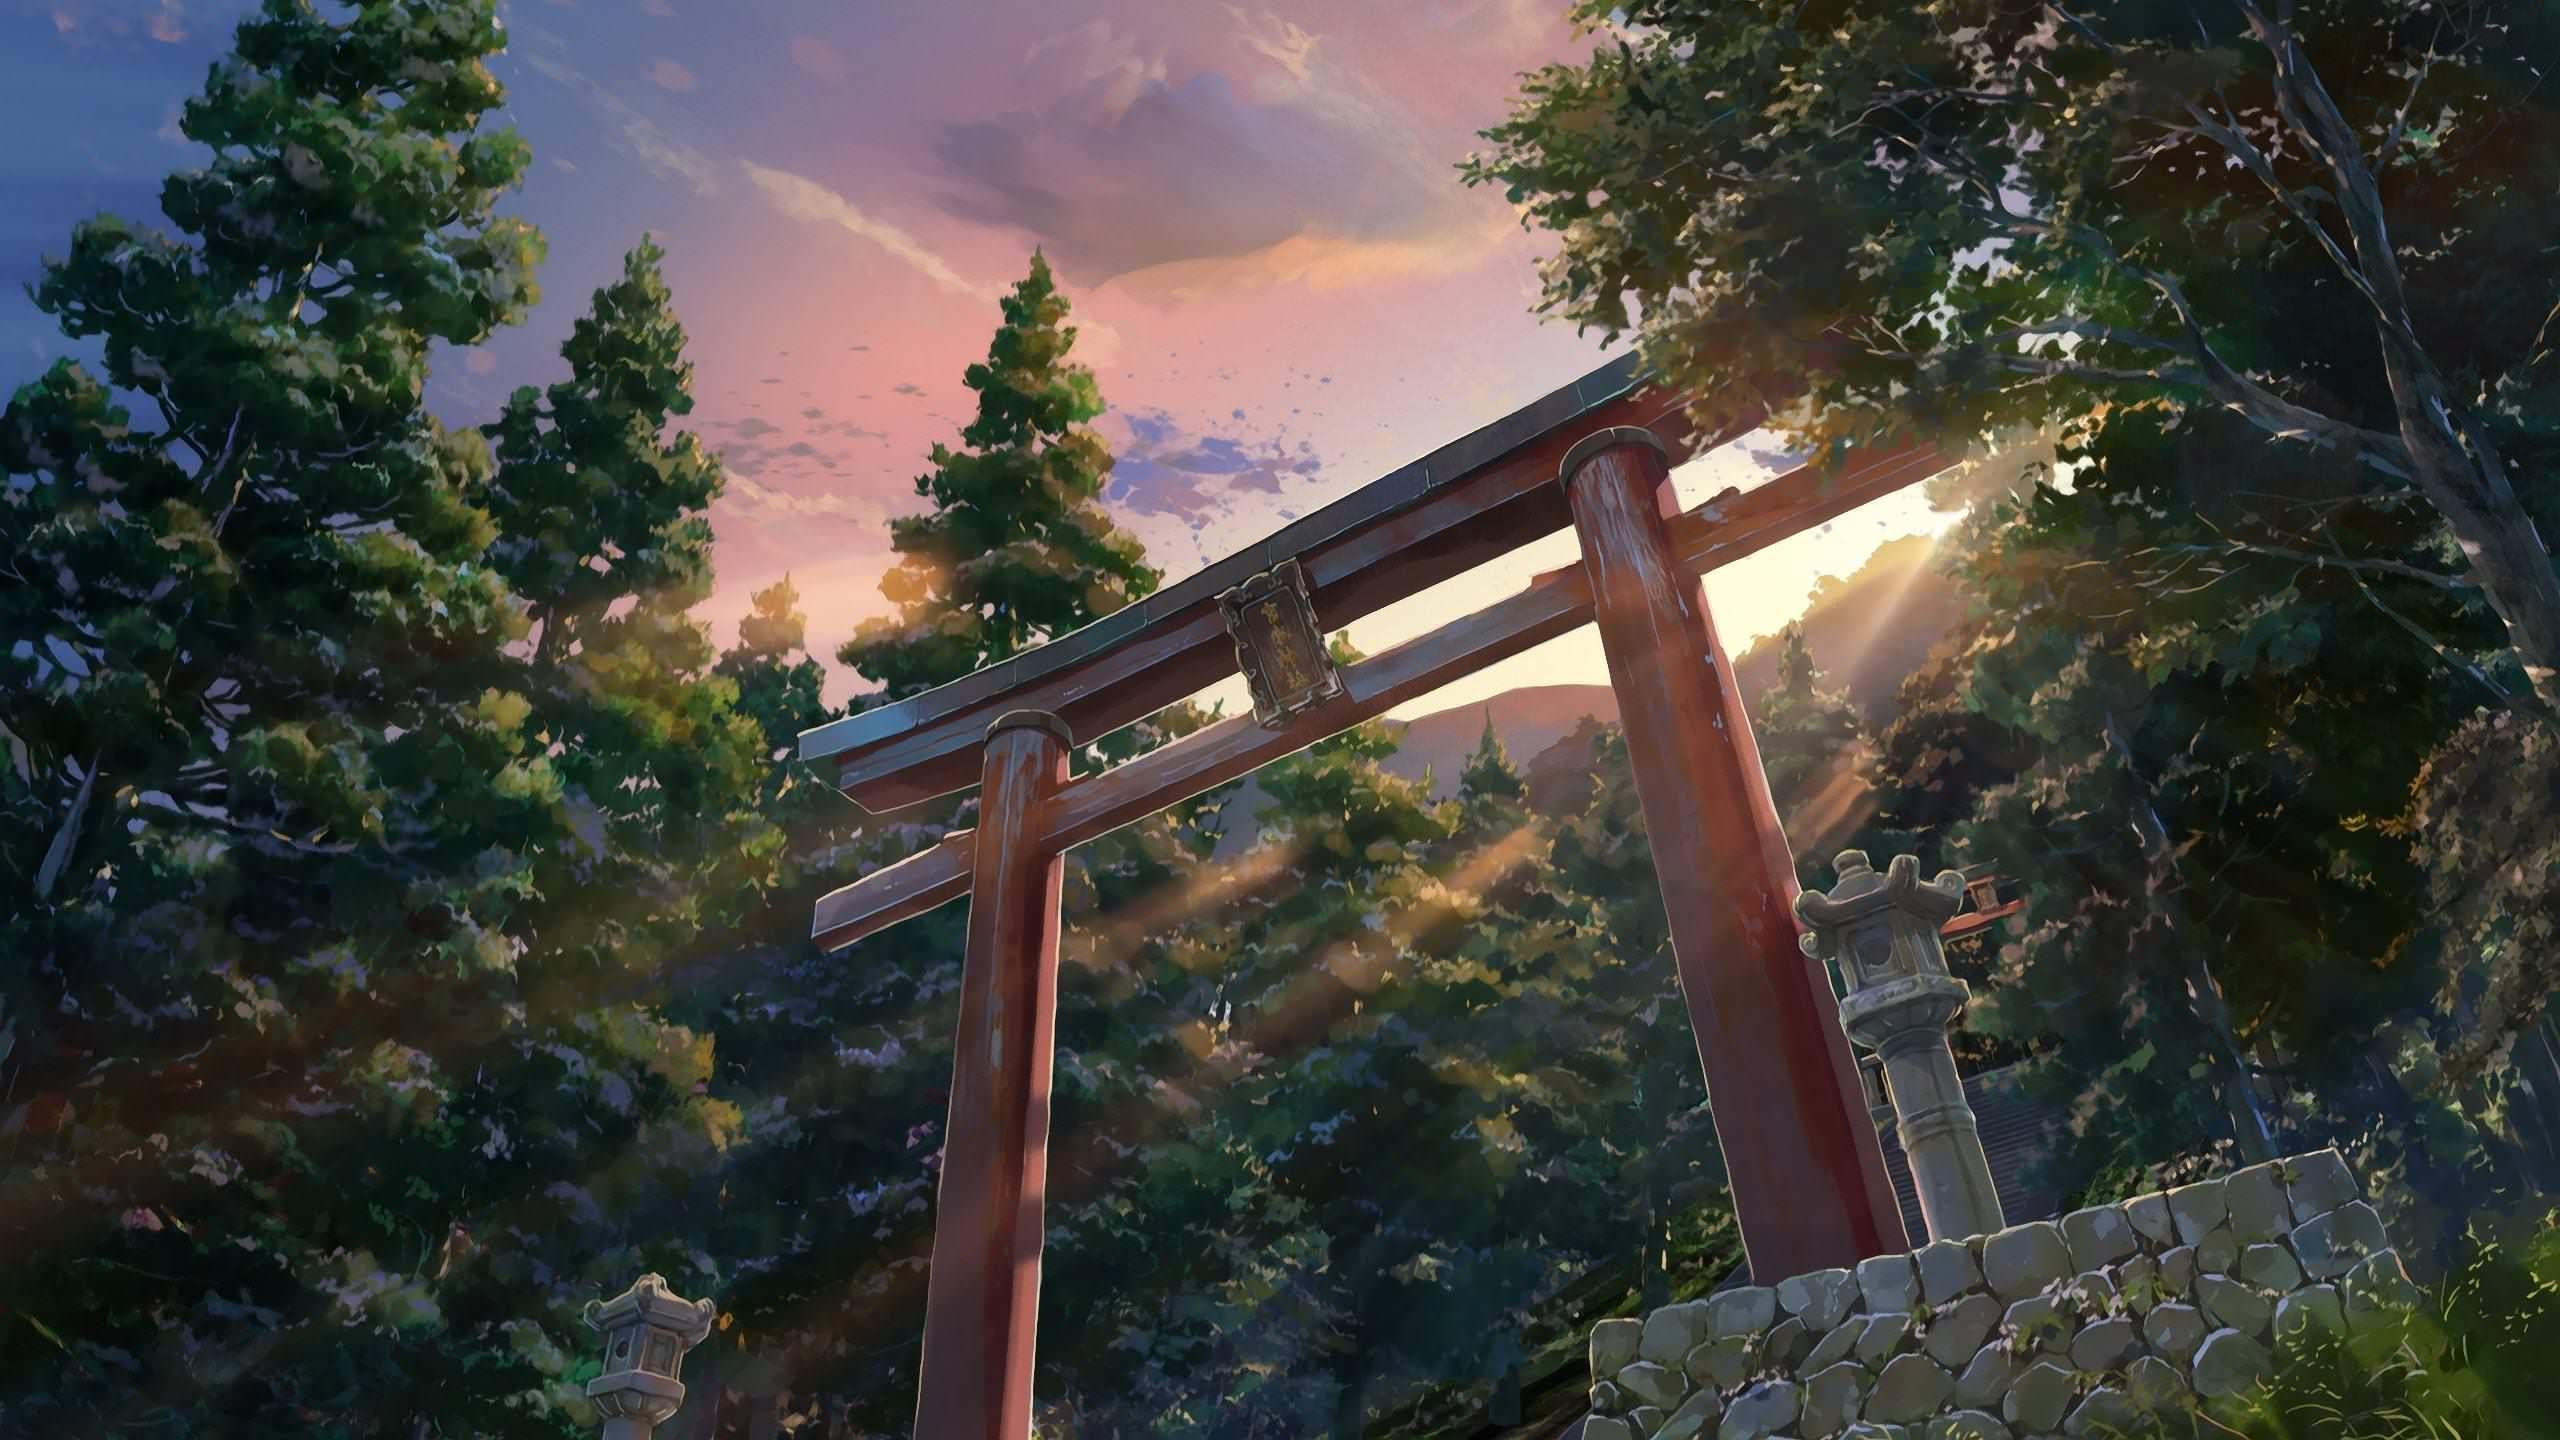 Your Name Scenery Wallpapers Top Free Your Name Scenery Backgrounds